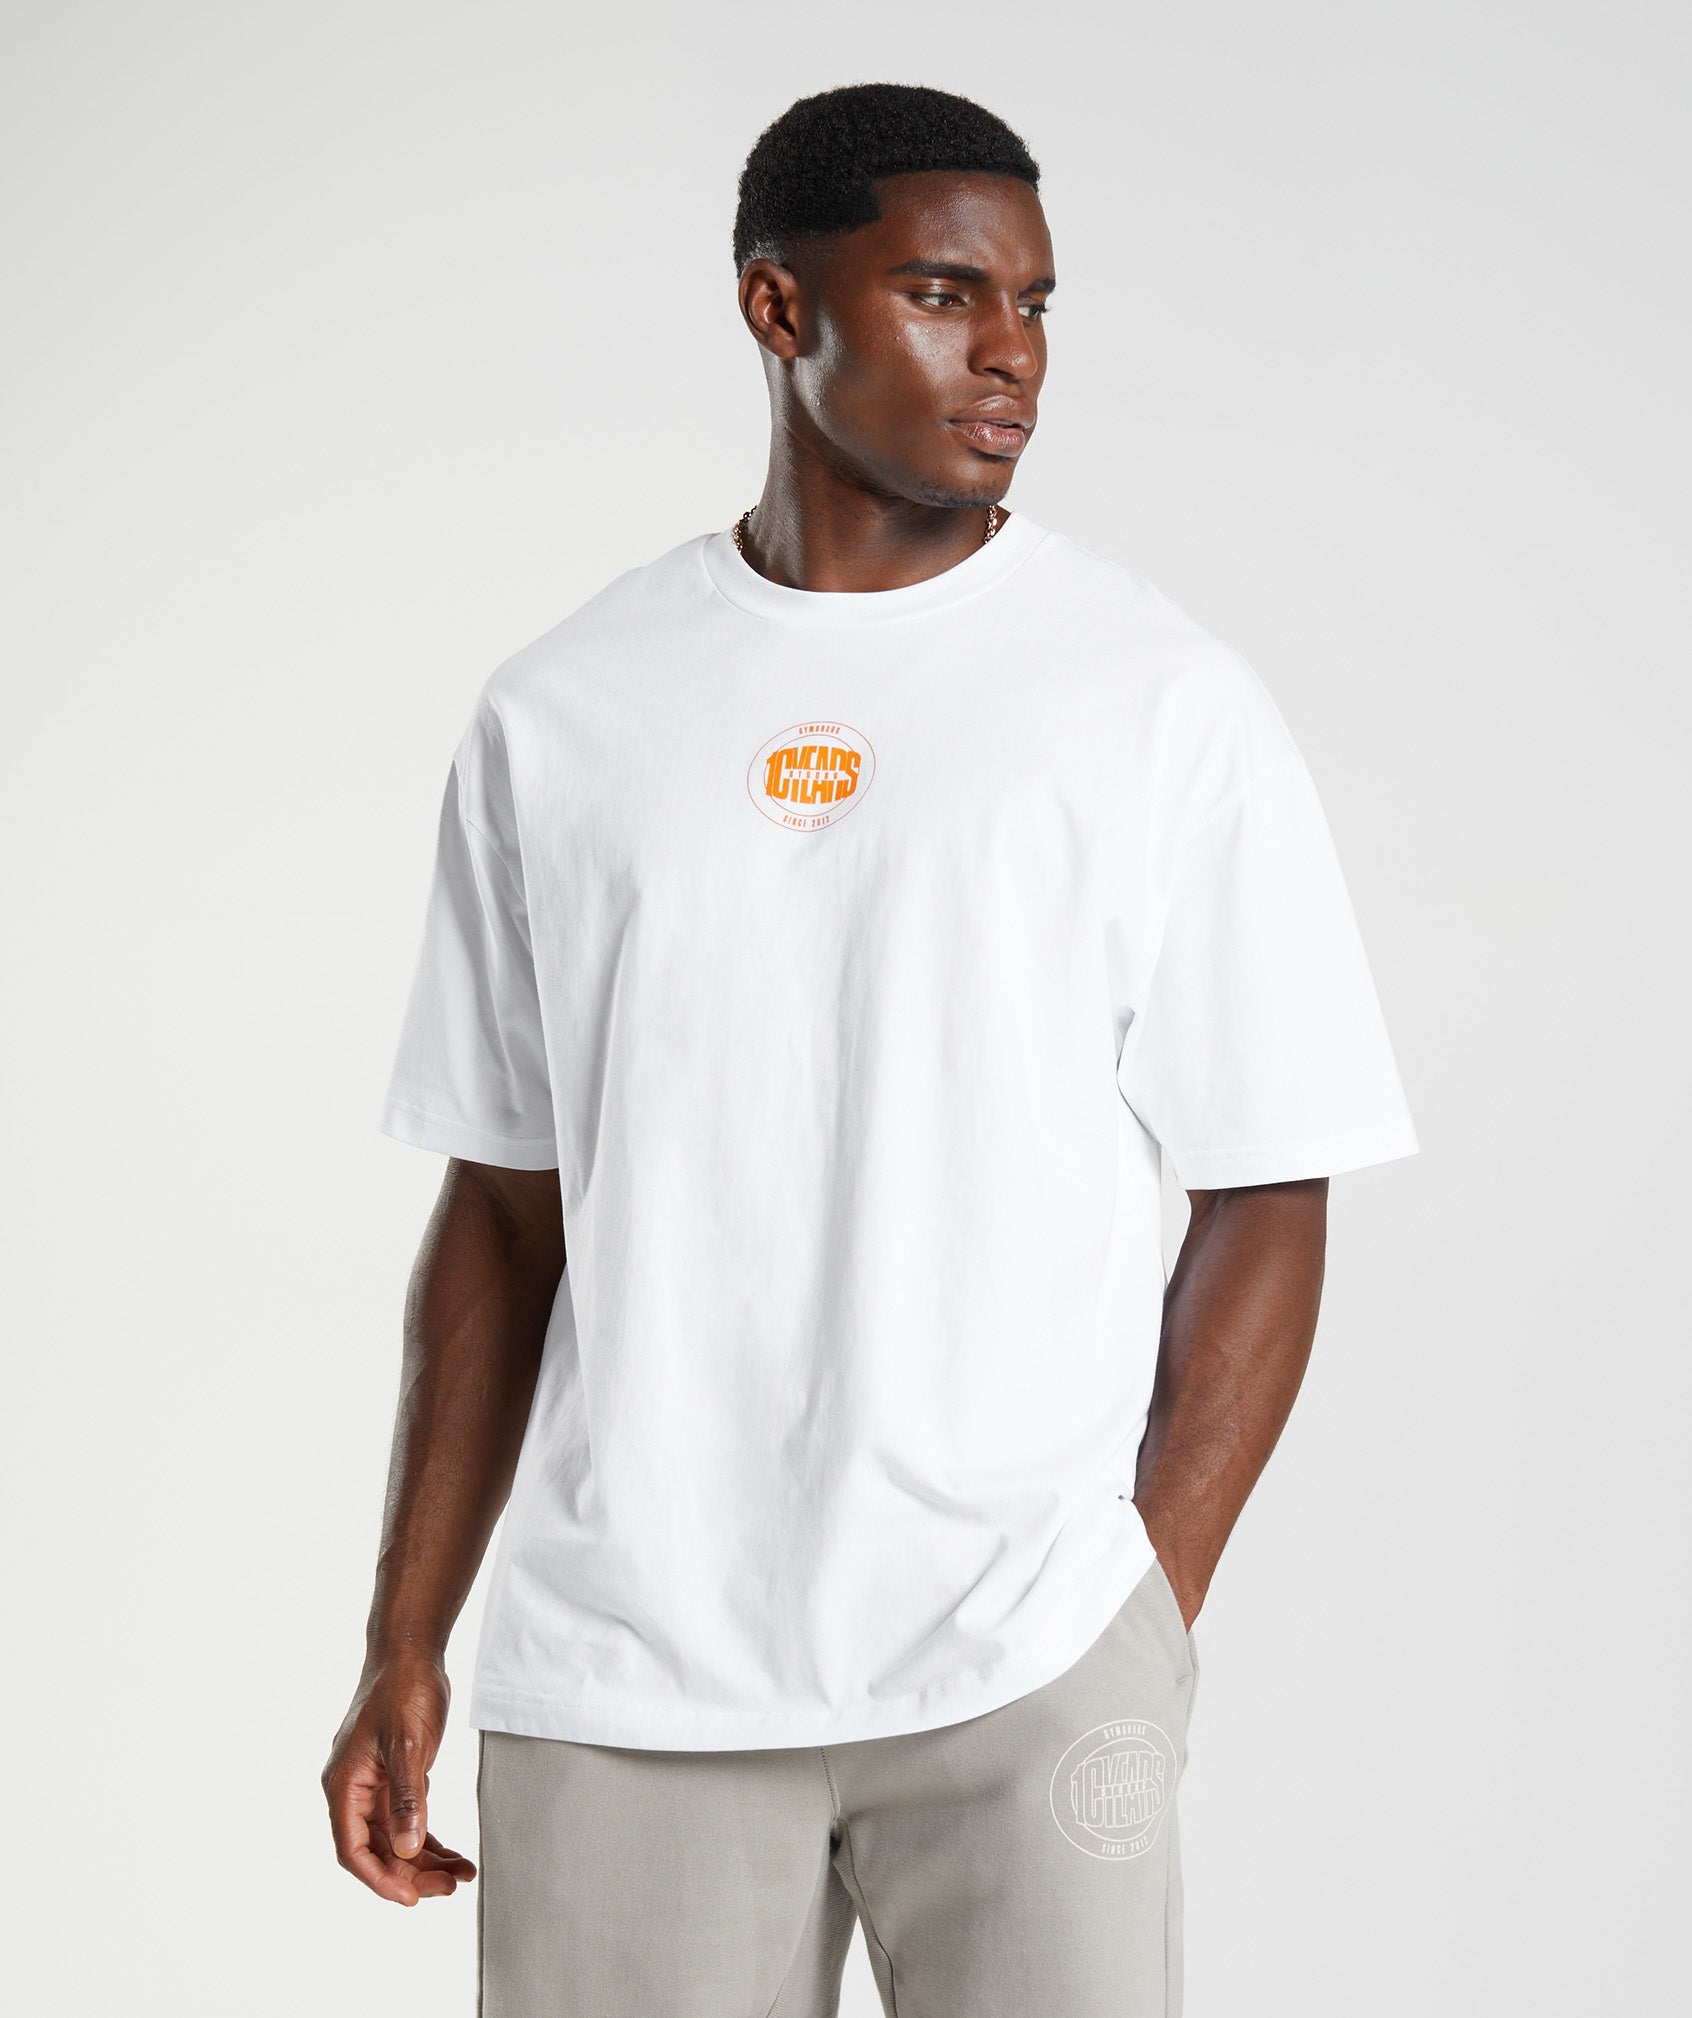 GS10 Year Oversized T-Shirt in White - view 2